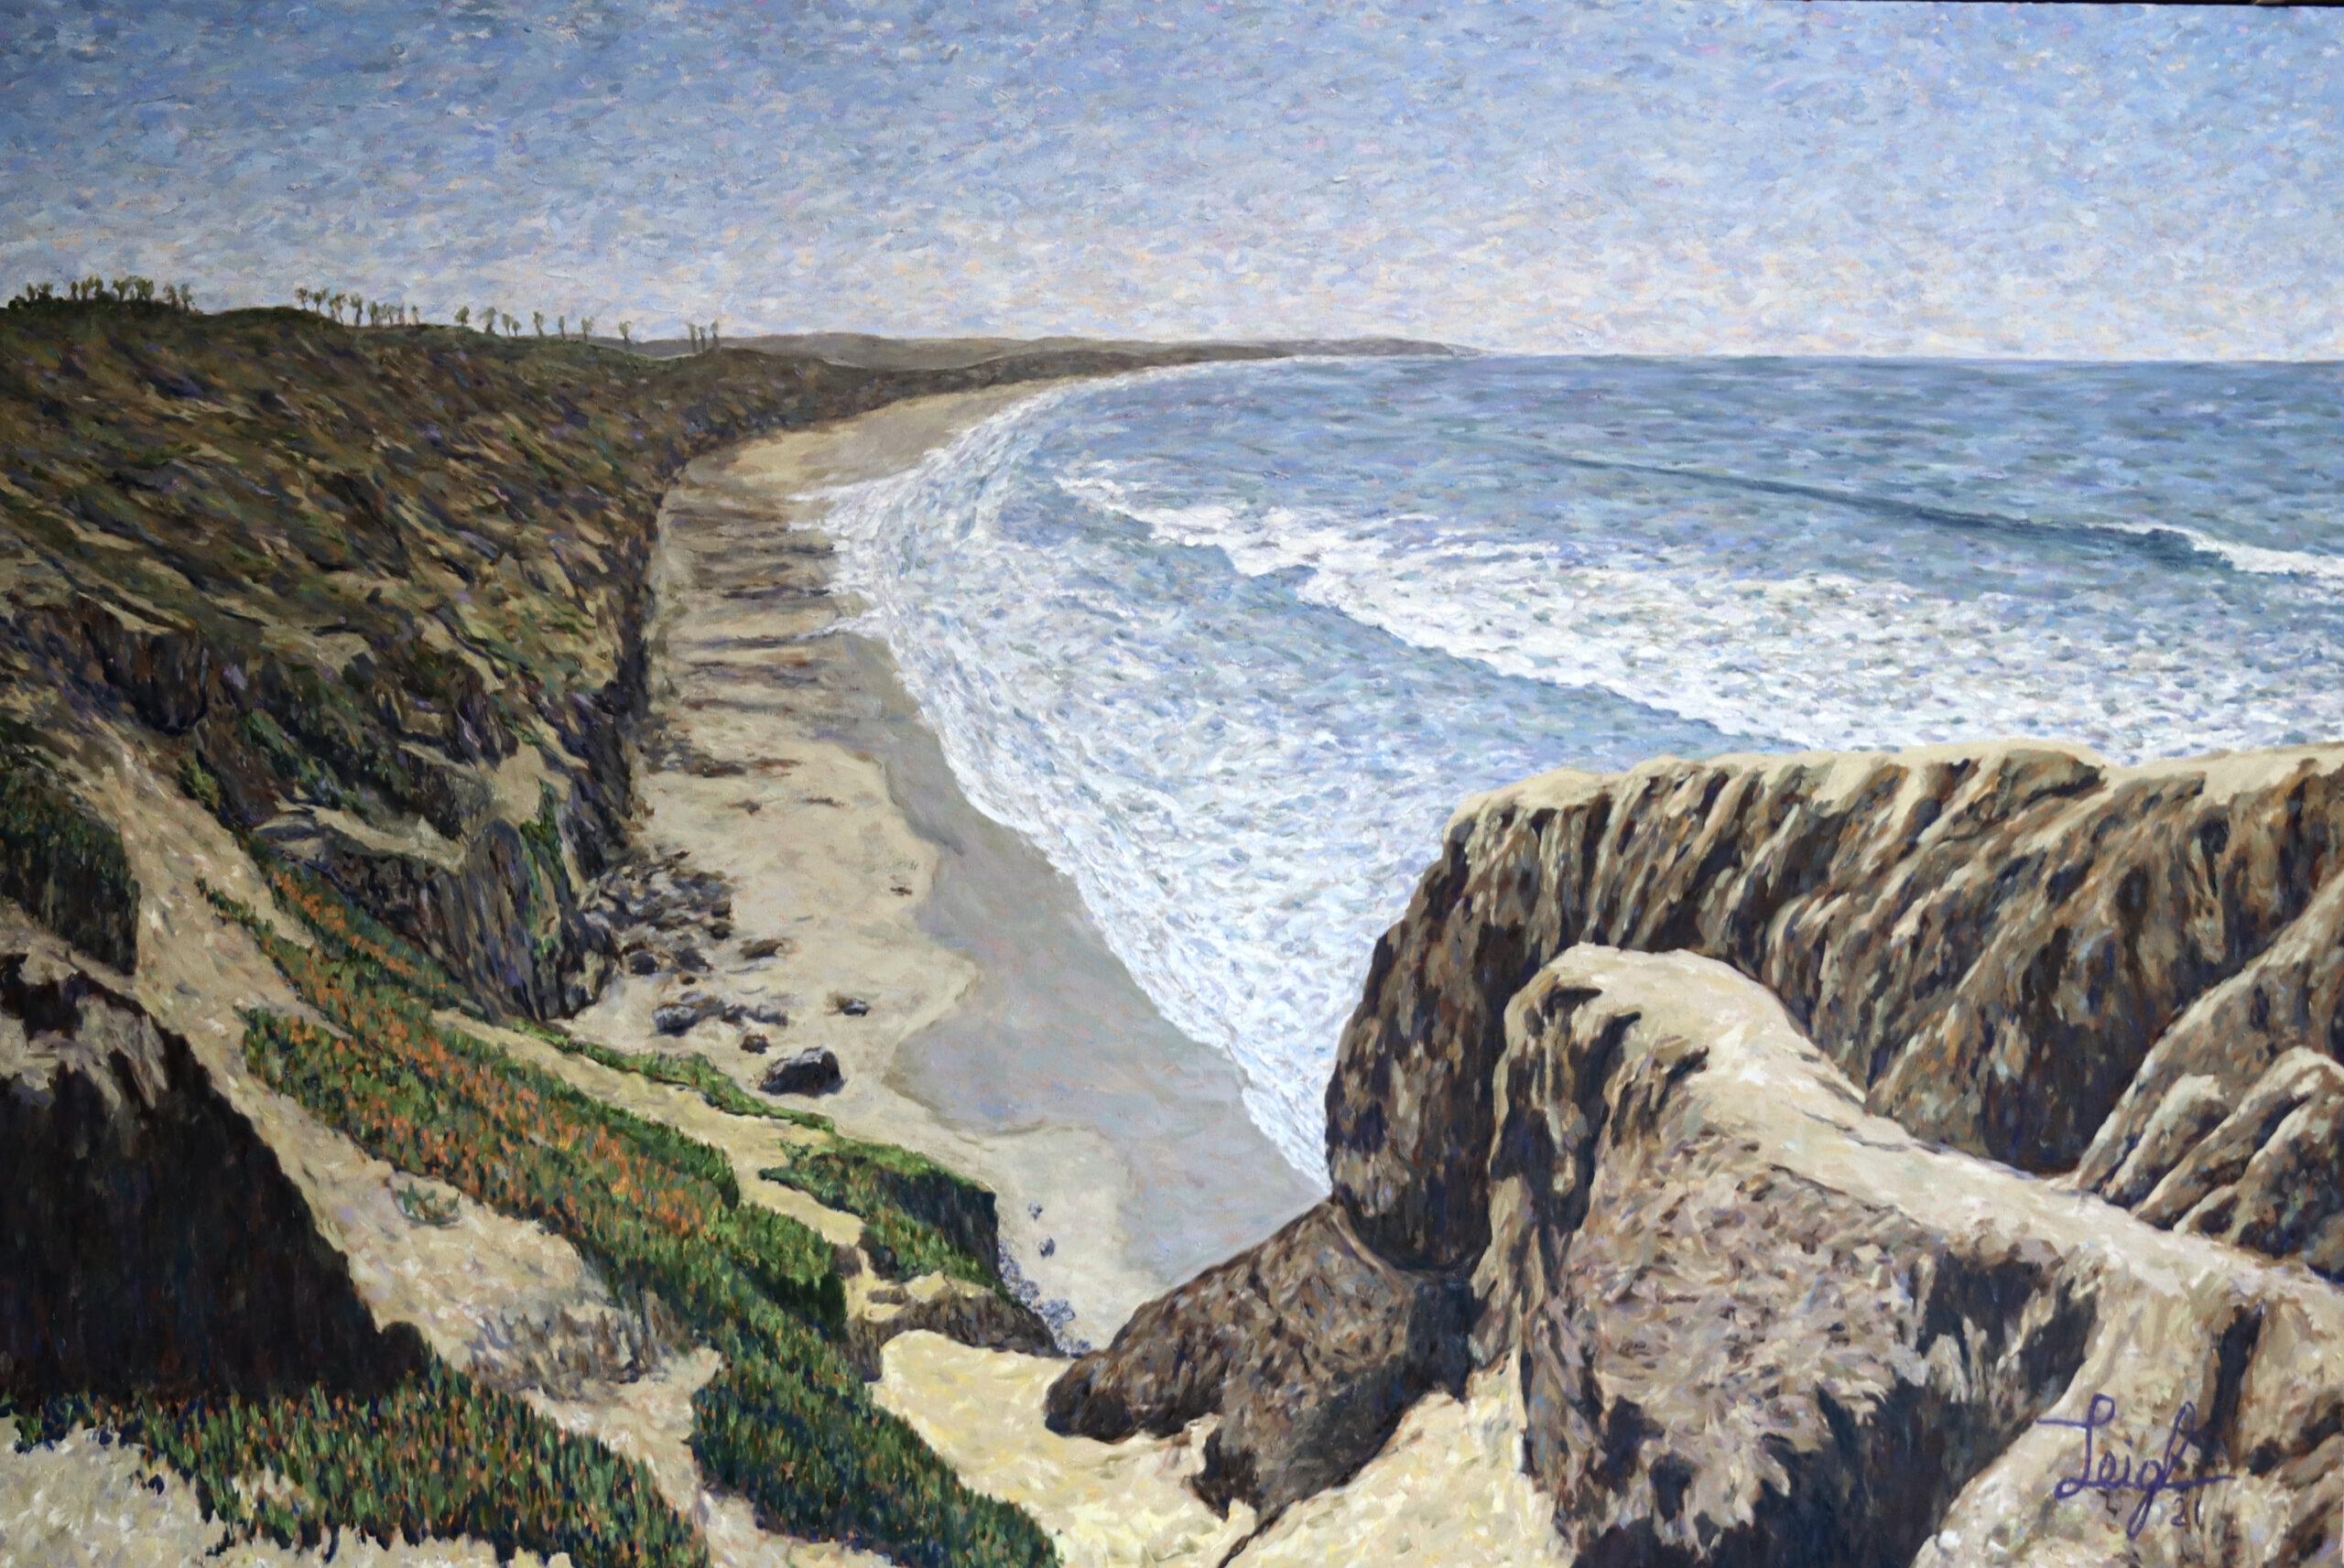 Turnaround Beach, Carlsbad 
(2021)  72 x 48  Not Available  •  On Loan from private party